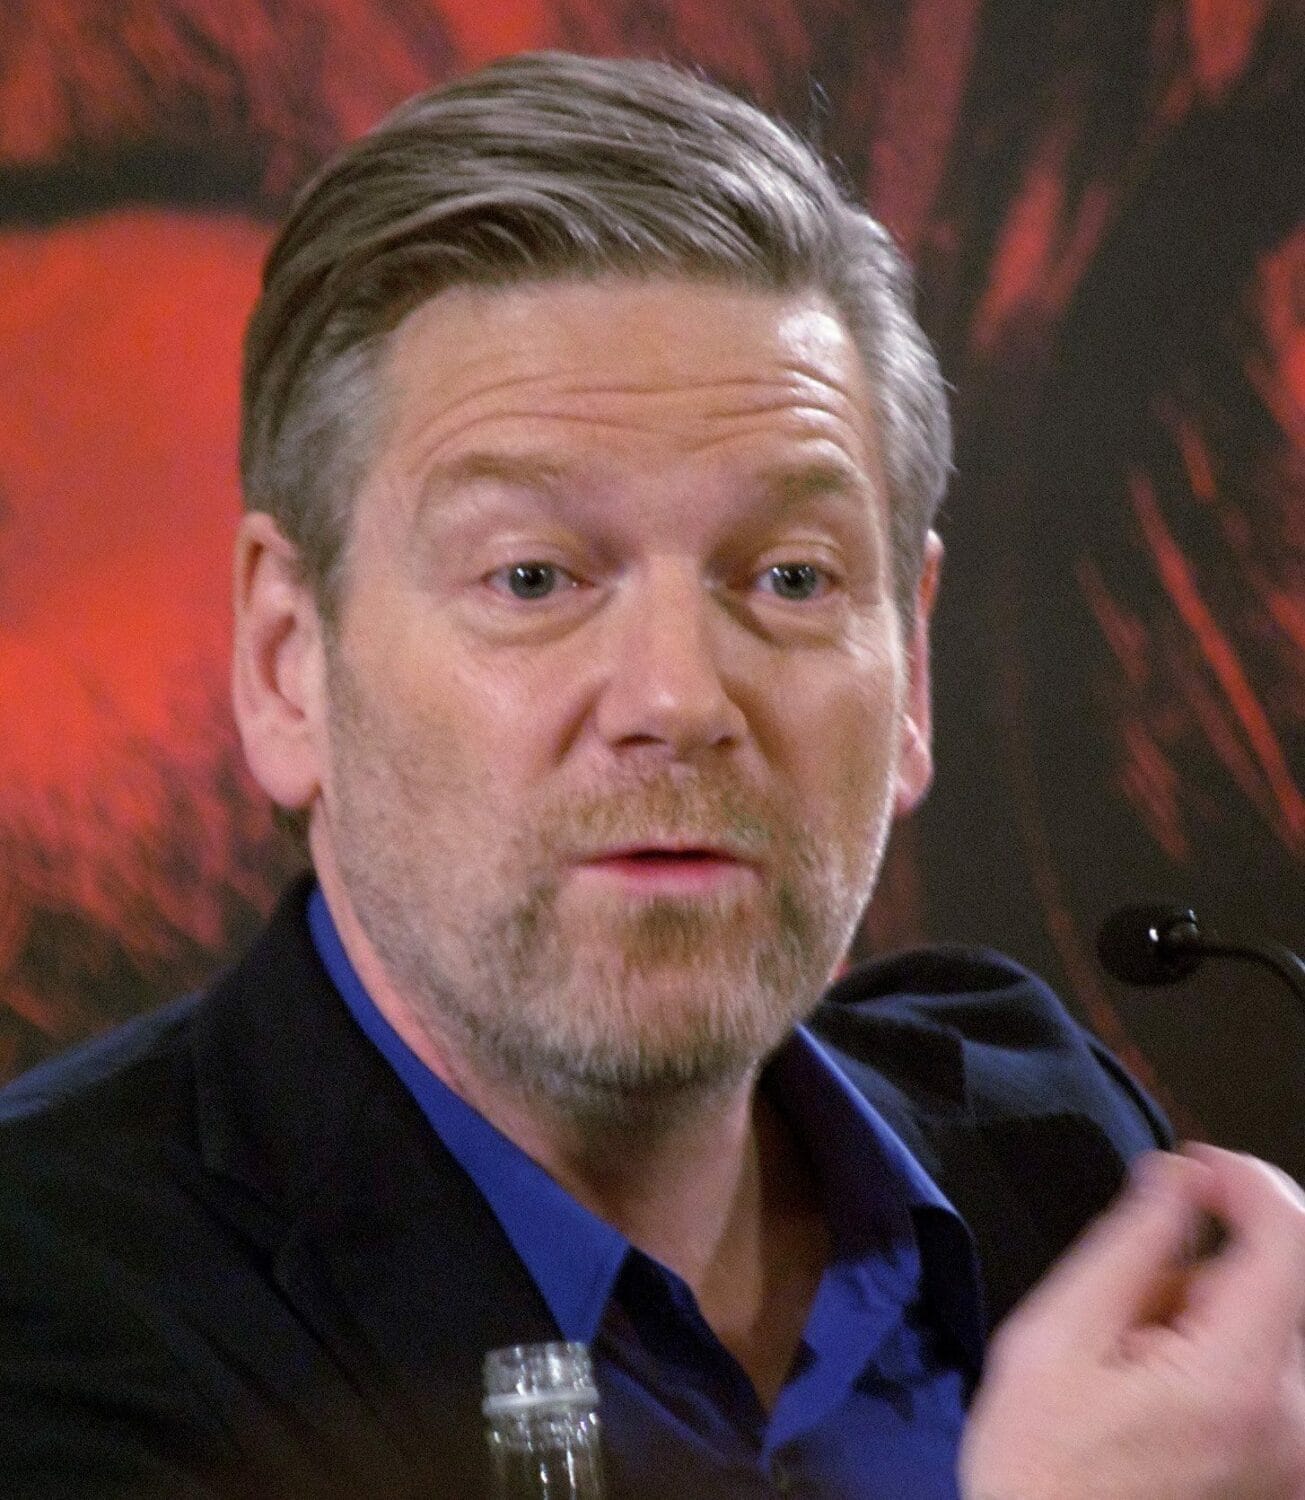 Kenneth Branagh in 2011. By Melinda Seckington, CC BY 2.0, https://commons.wikimedia.org/w/index.php?curid=15073150